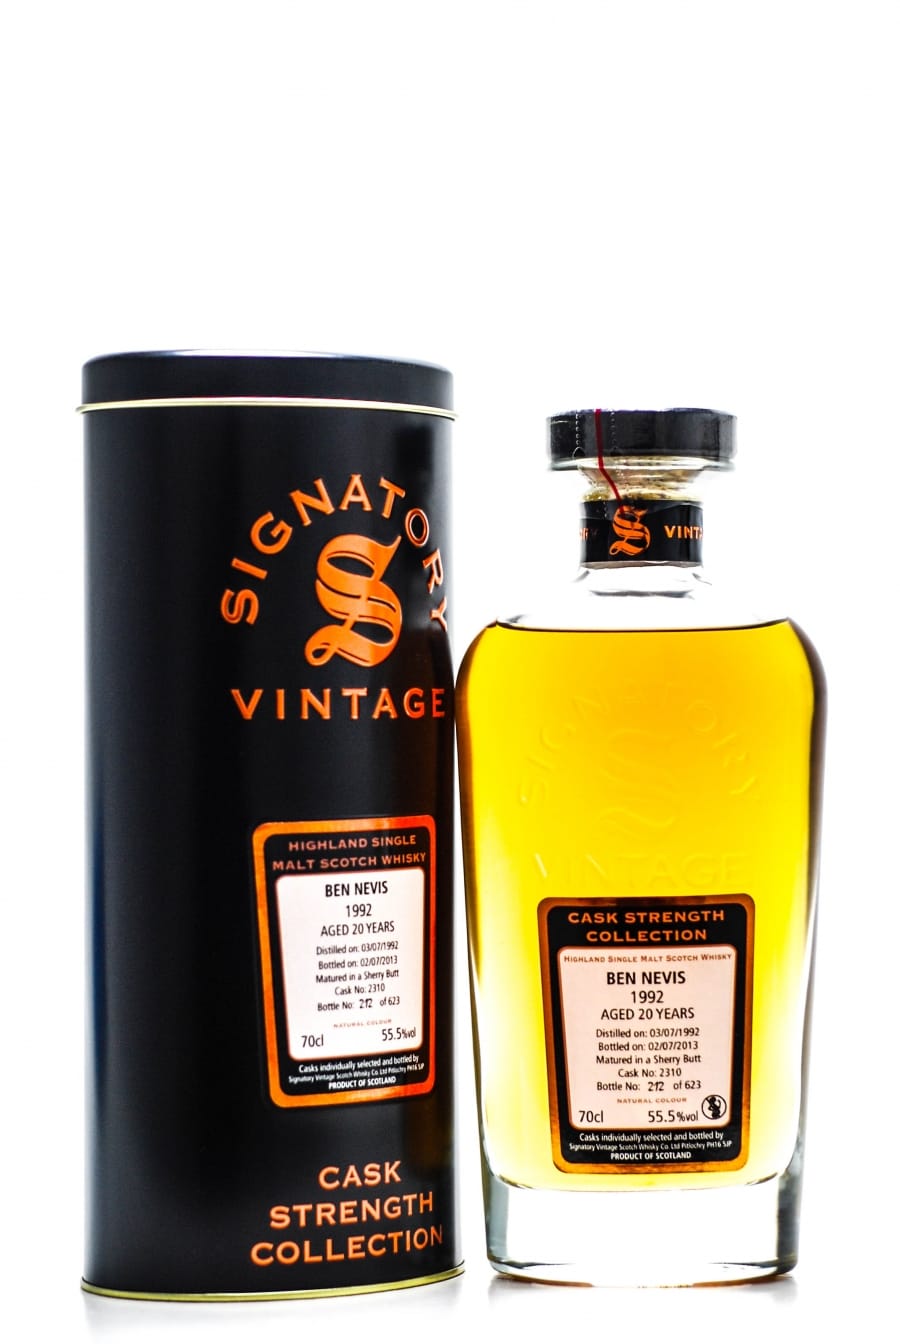 Ben Nevis - 20 Years Years Old Signatory Vintage Cask: 2310 55.5% 1992 In Original Container